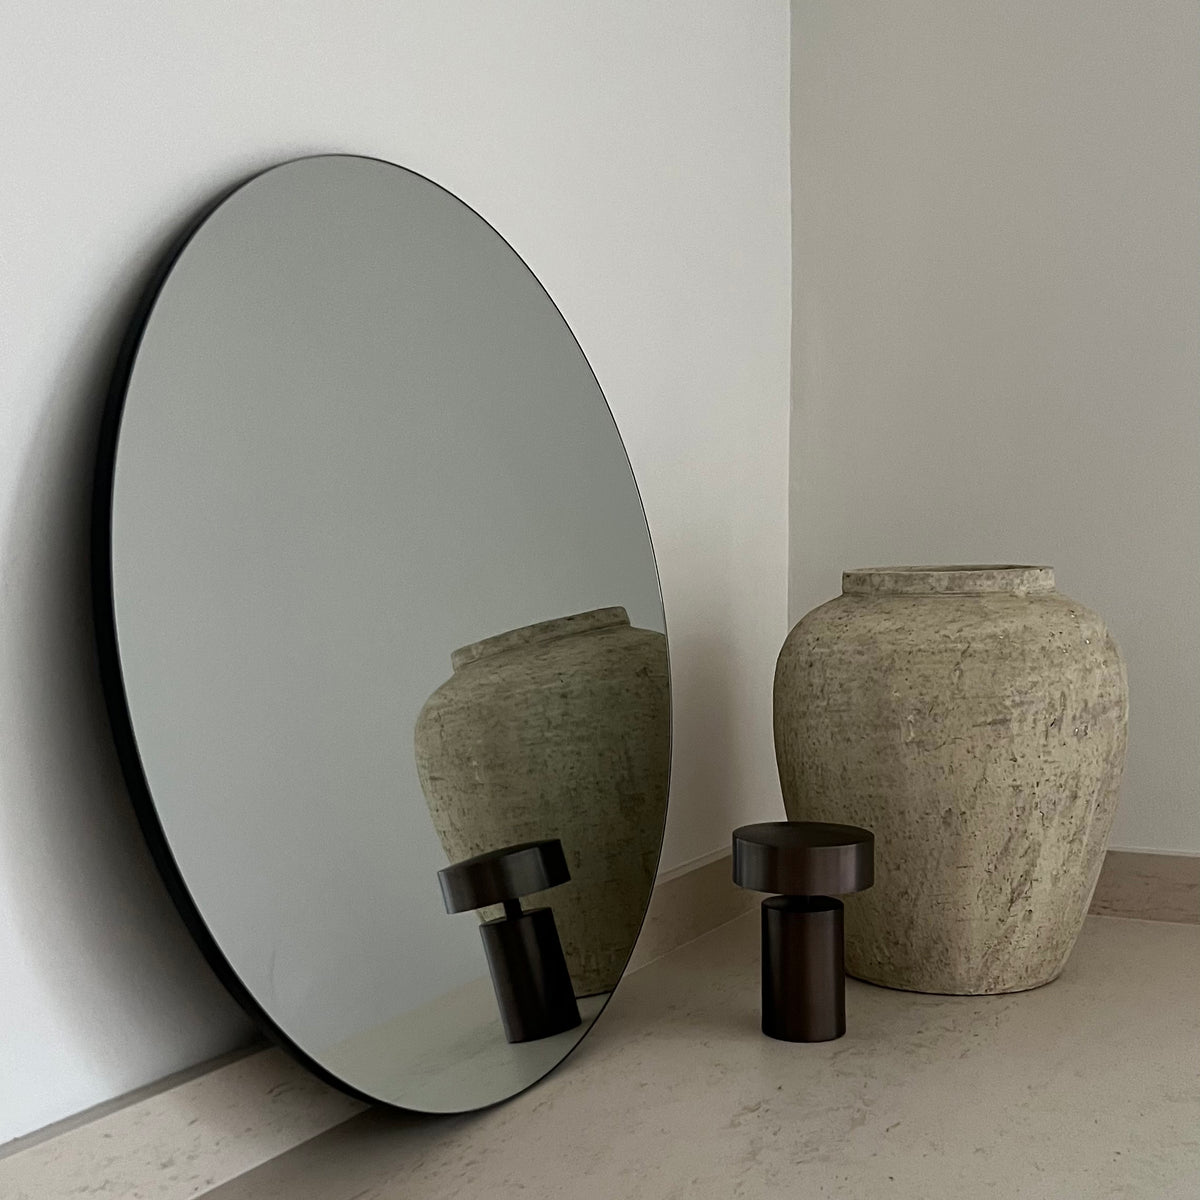 Small Frameless Round Wall Mirror leaning against wall, adjacent to vase